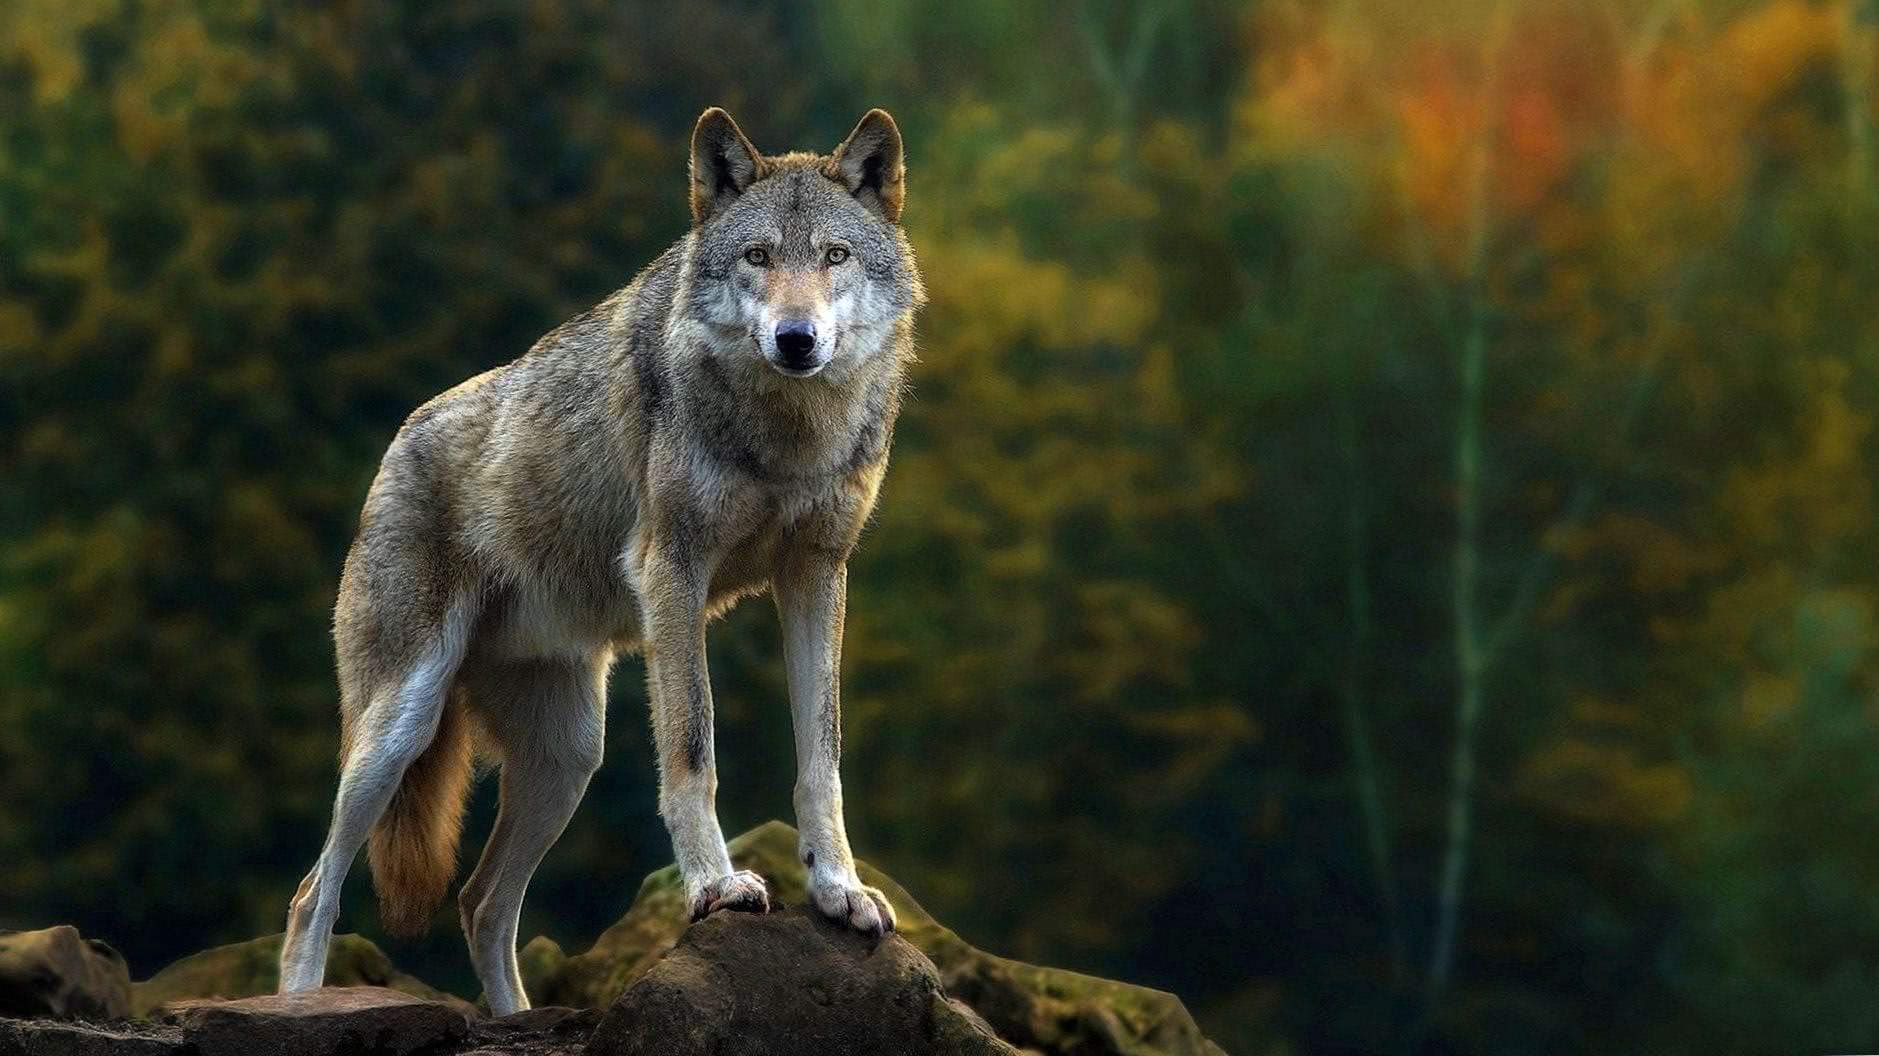 Wallpaper HD For Wolf Image 1